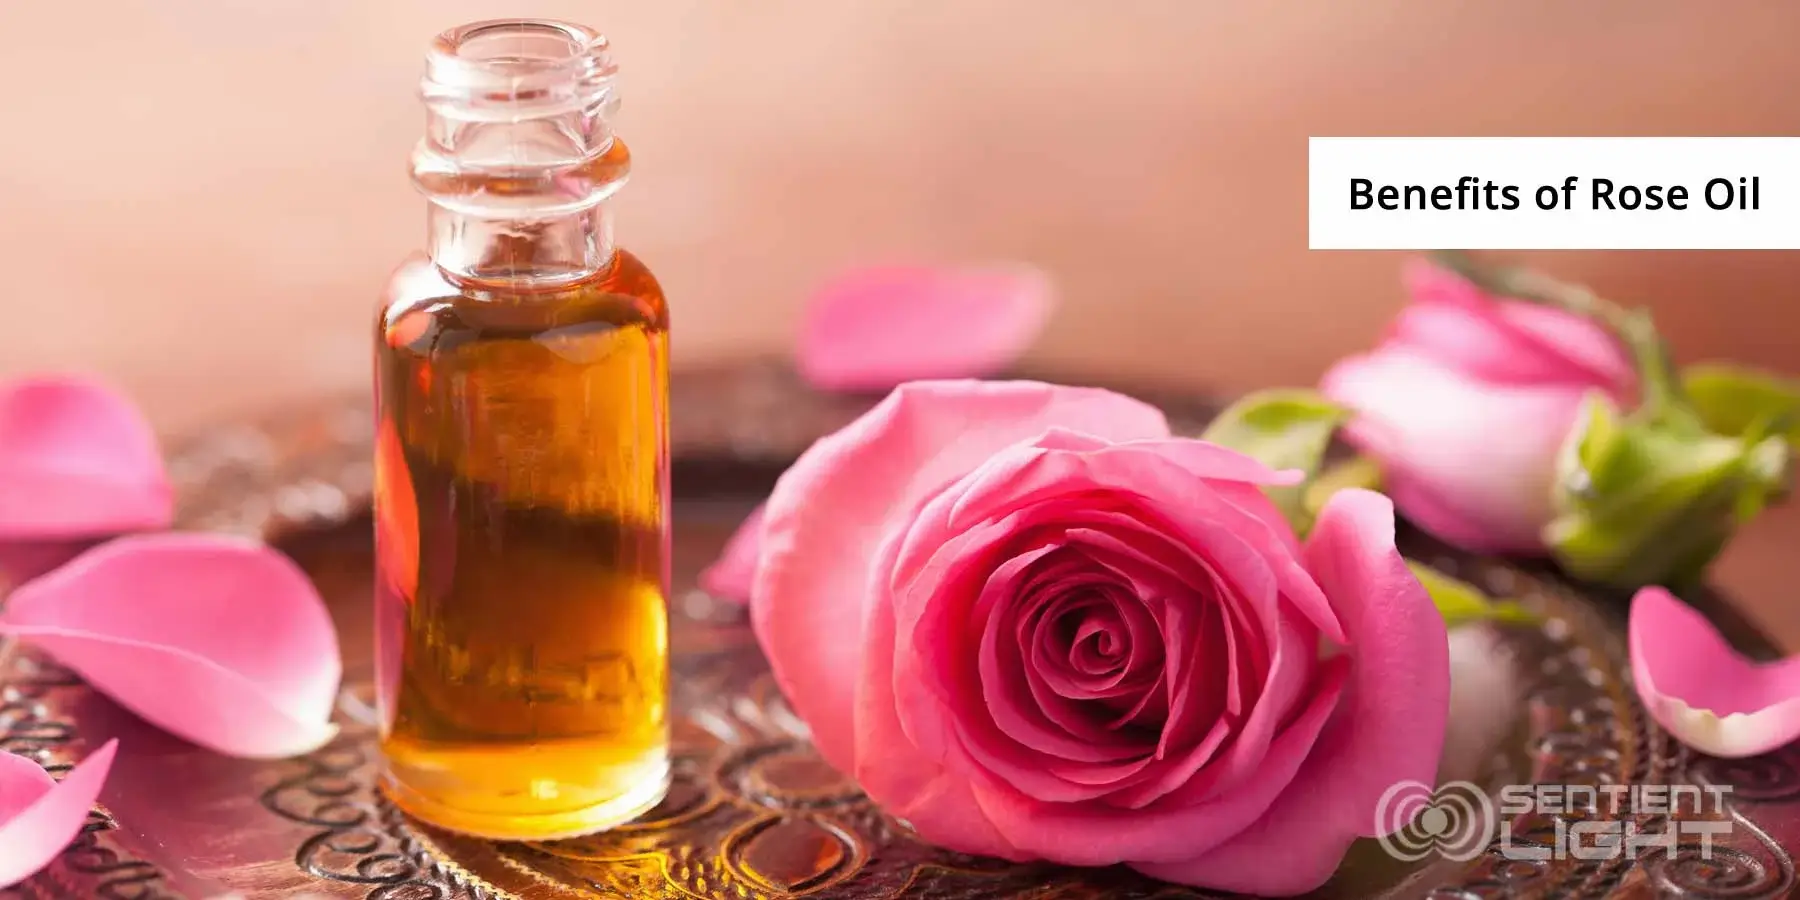 Health Benefits of Rose Essential Oil